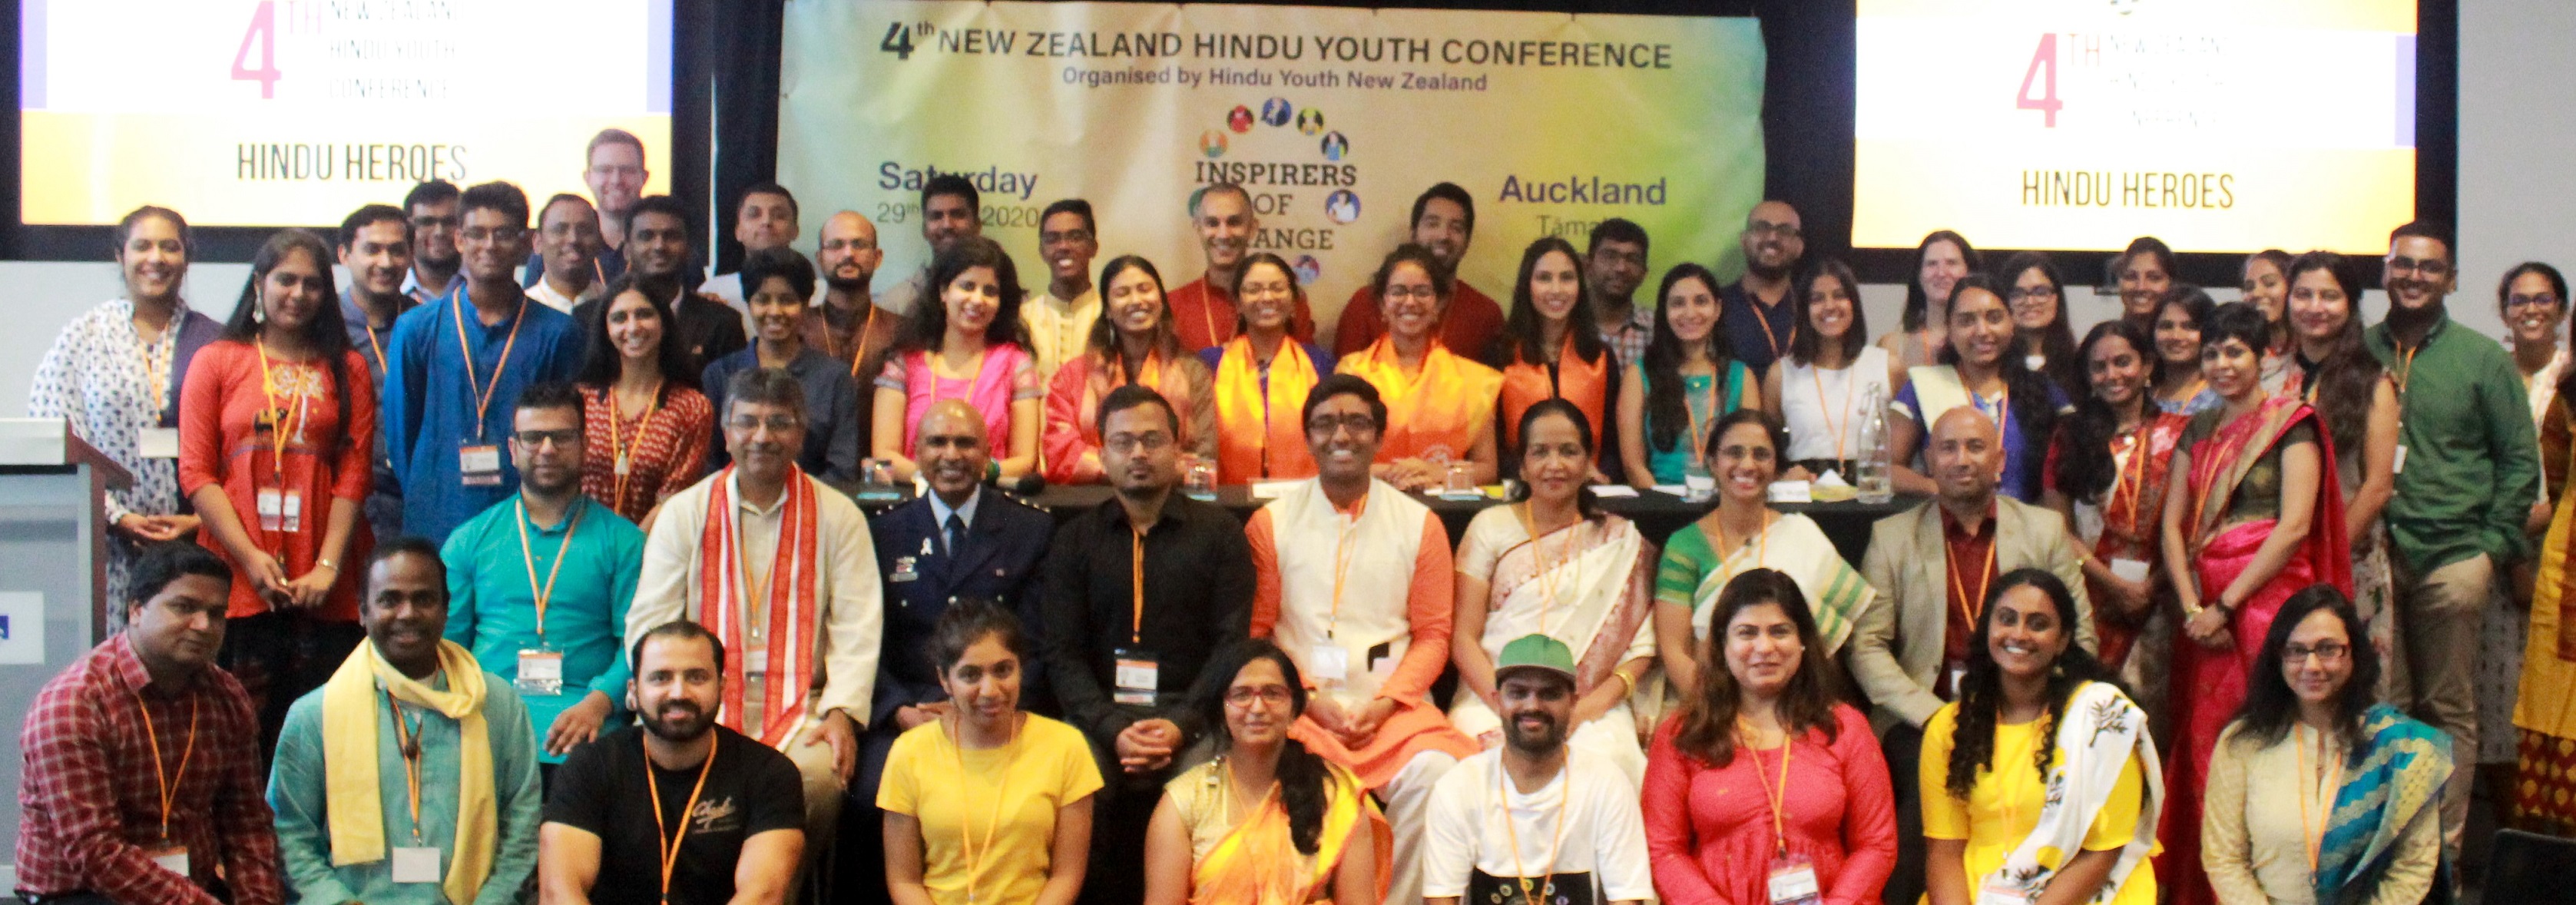 NZ Hindu Youth Conference